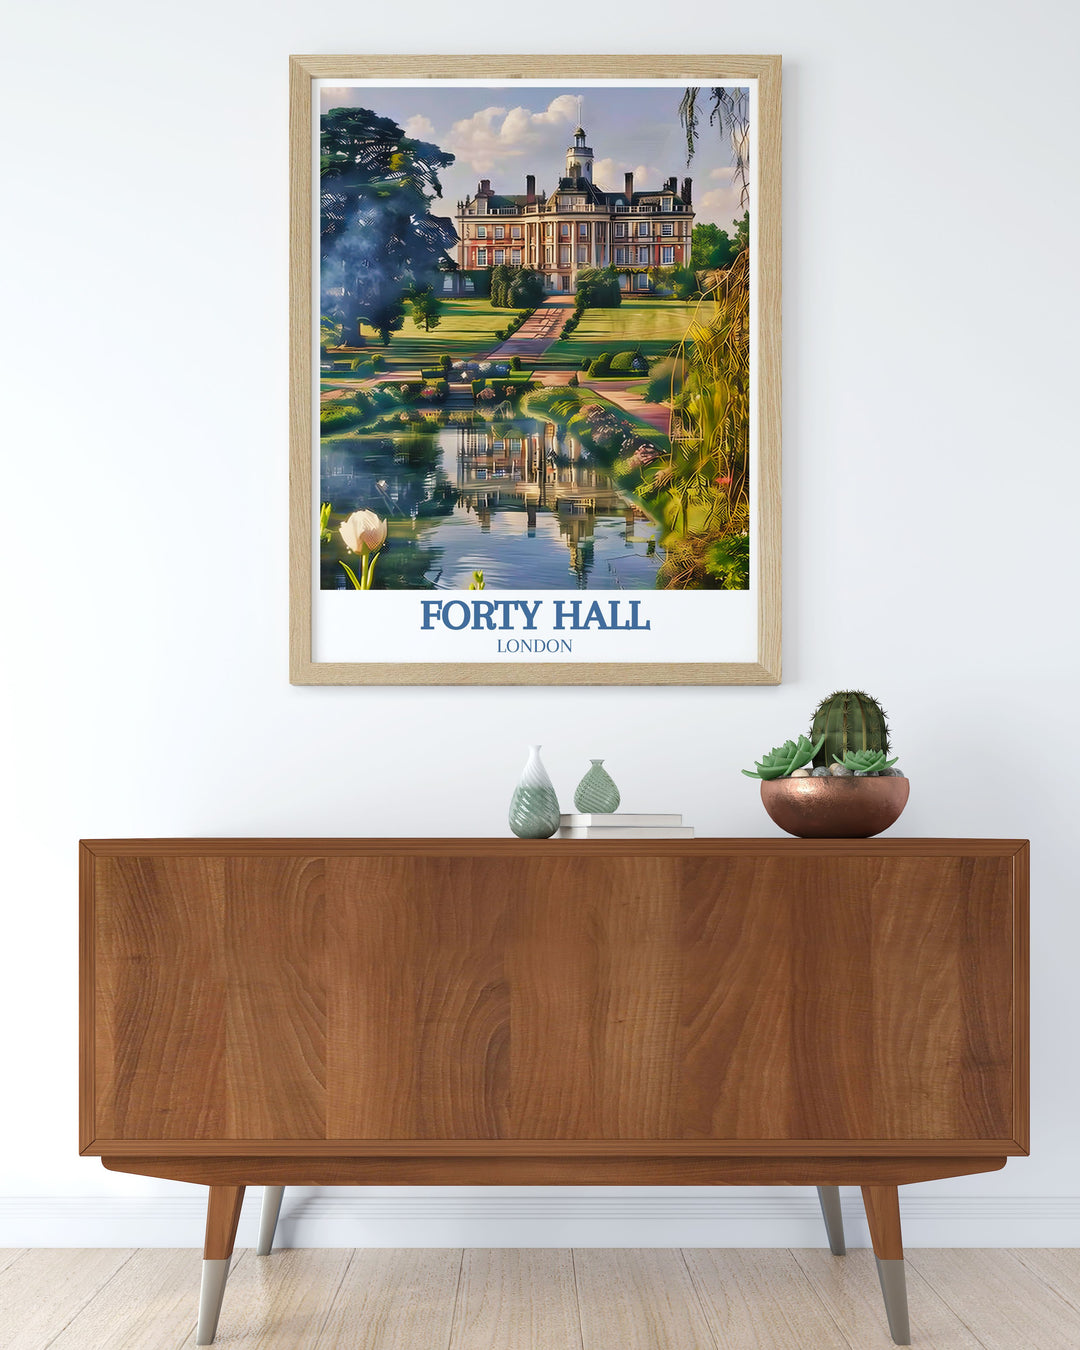 Depicting the grand architecture of Forty Hall, this artwork invites viewers to explore the historic mansion and its significant role in Londons heritage.